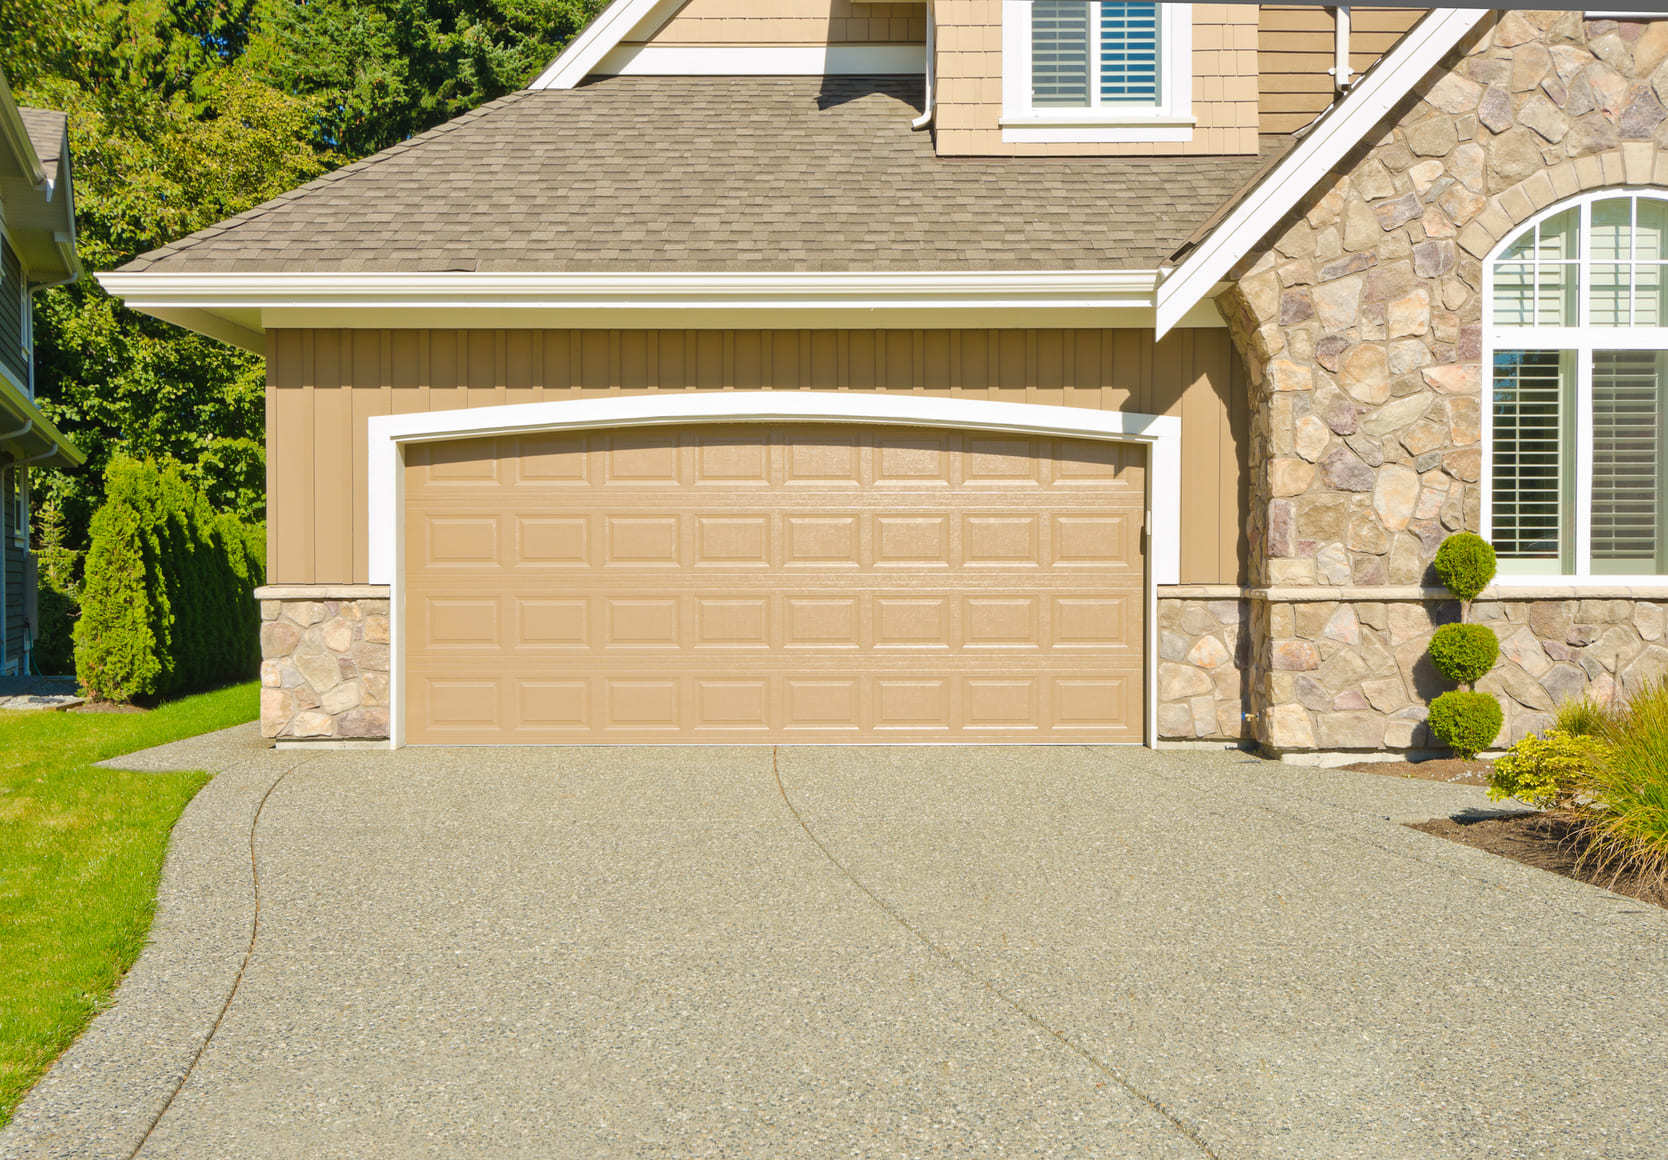 Home with a garage typical of homes for sale in Courtice, Ontario